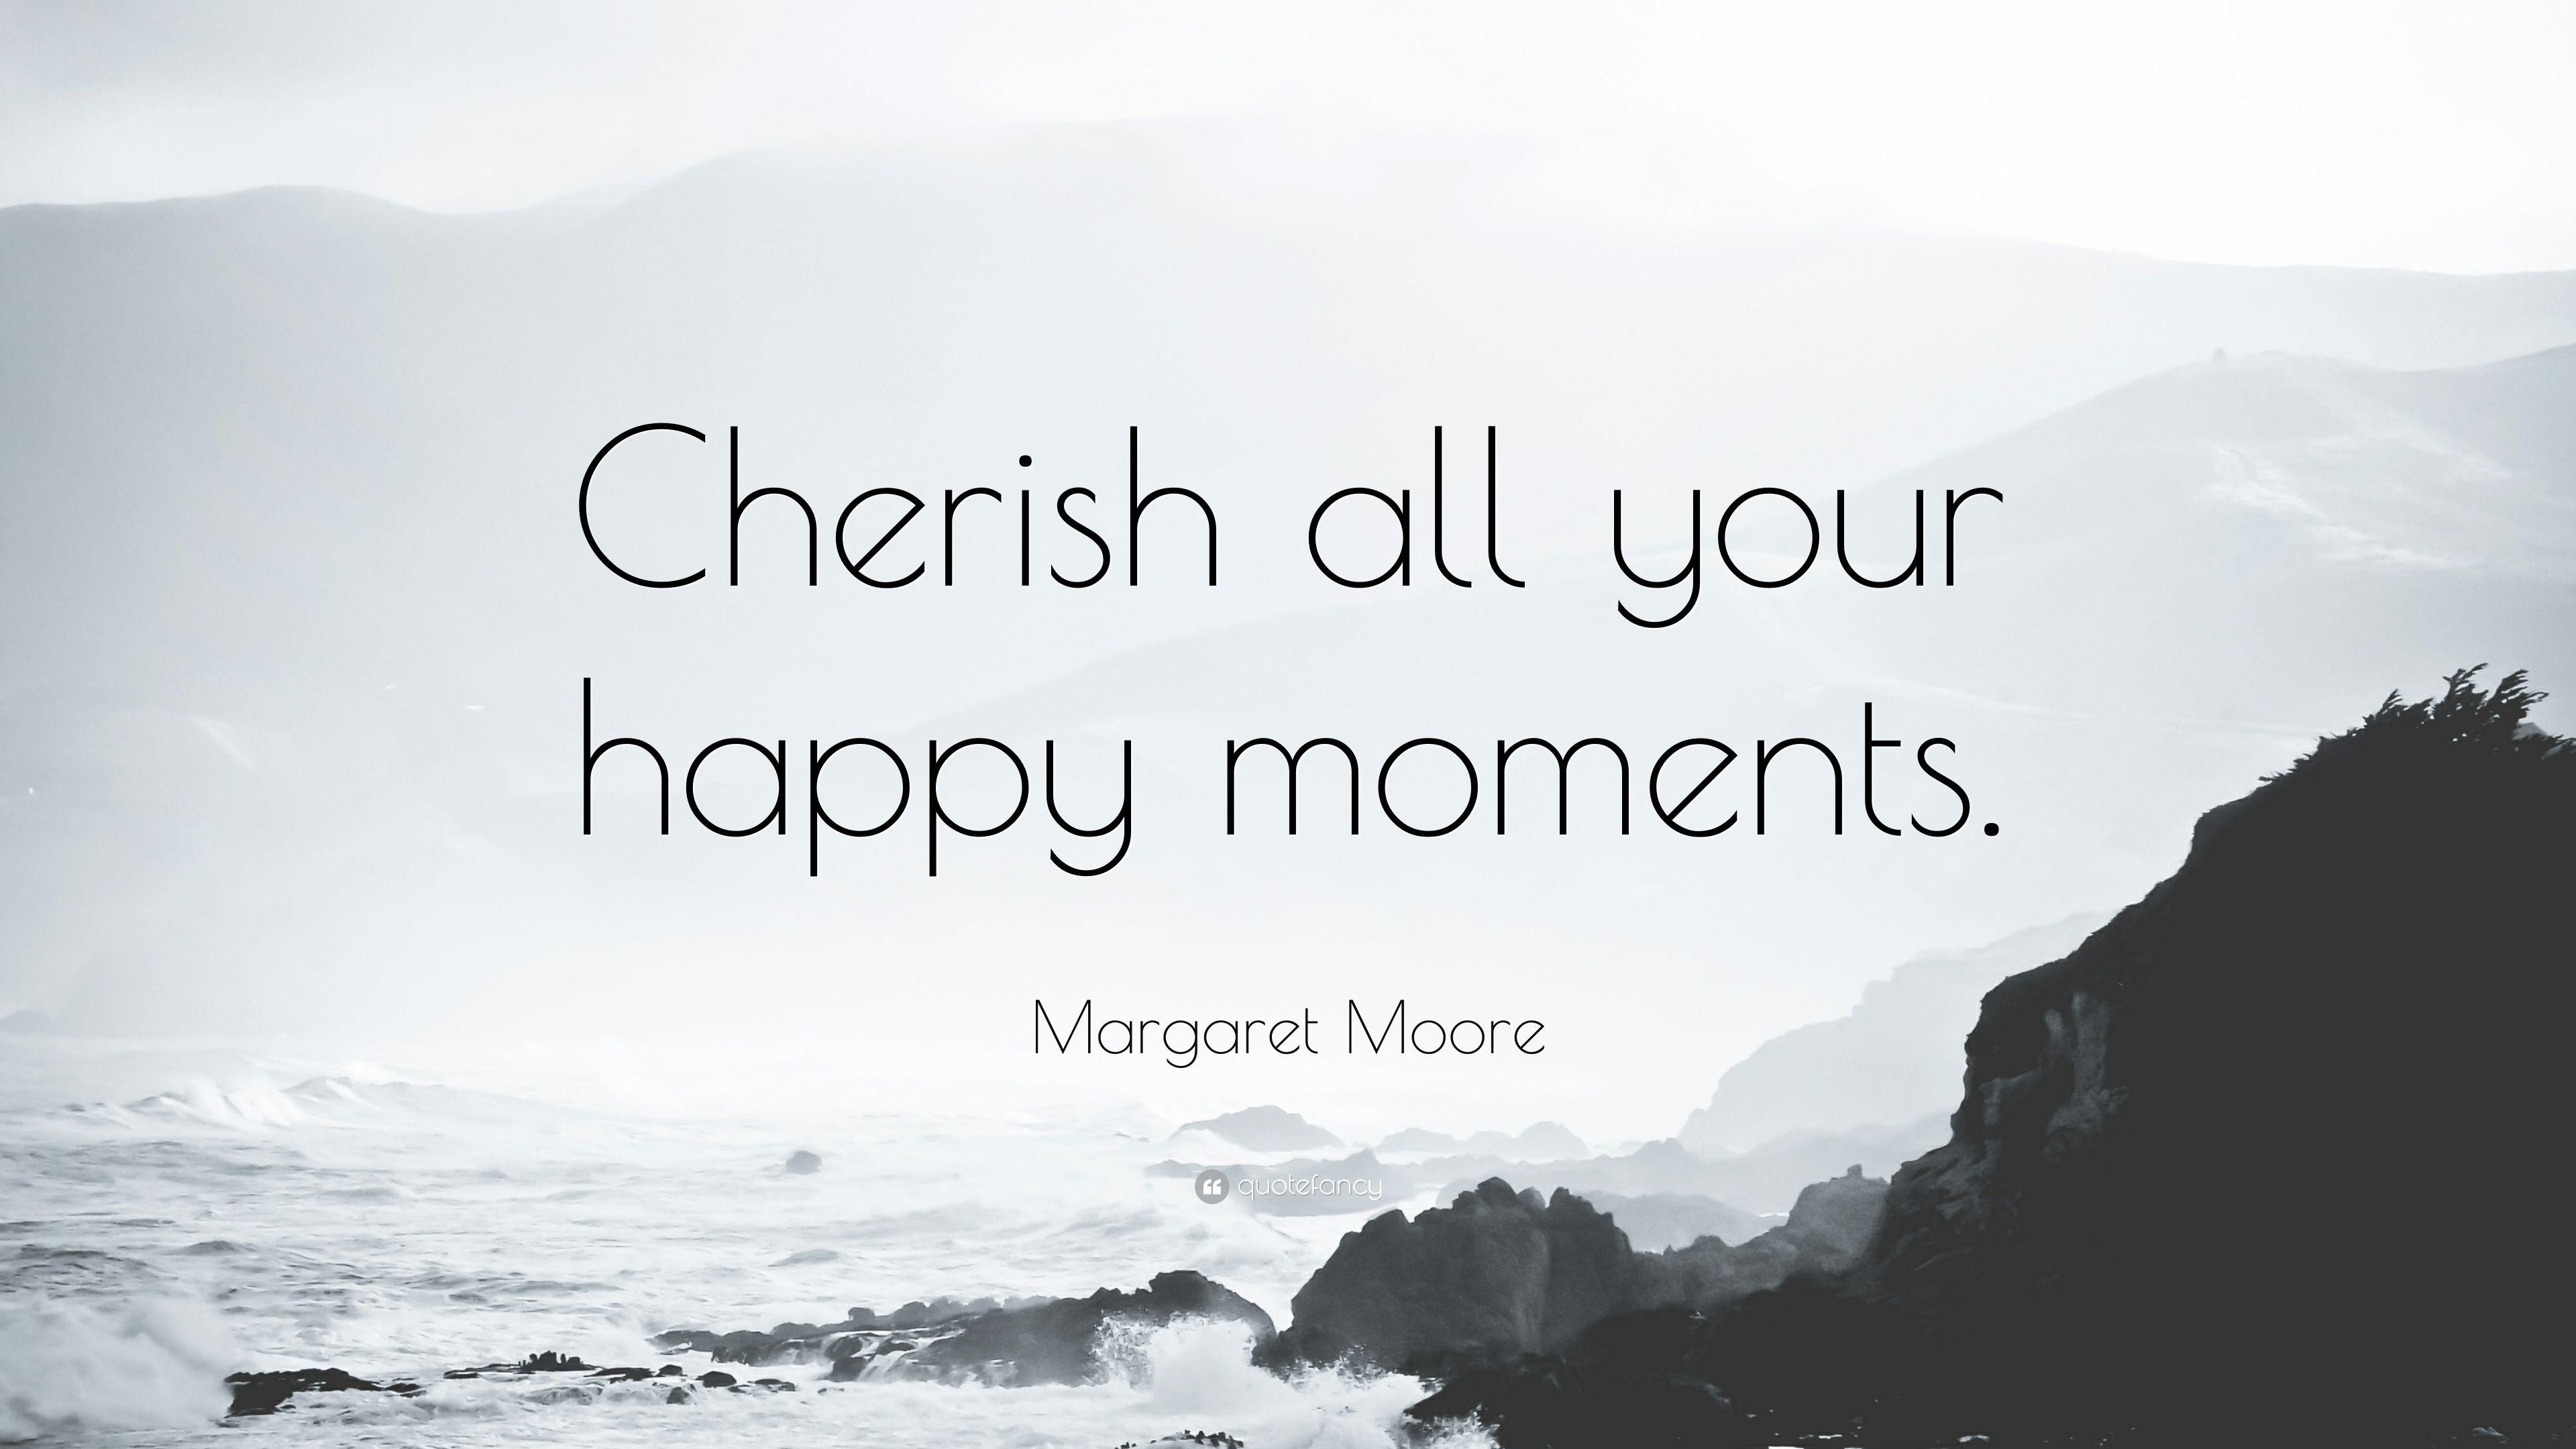 Margaret Moore Quote: “Cherish all your happy moments.” 12